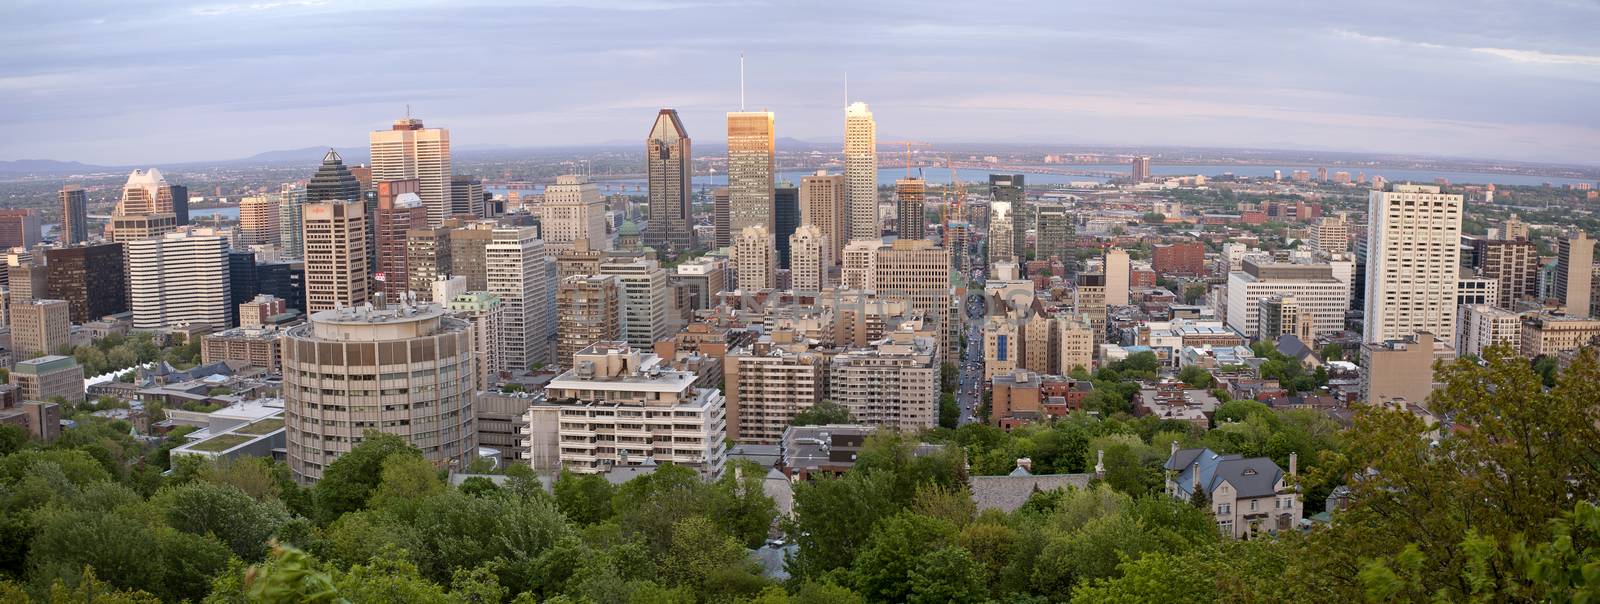 Panoramic Photo Montreal city by pictureguy